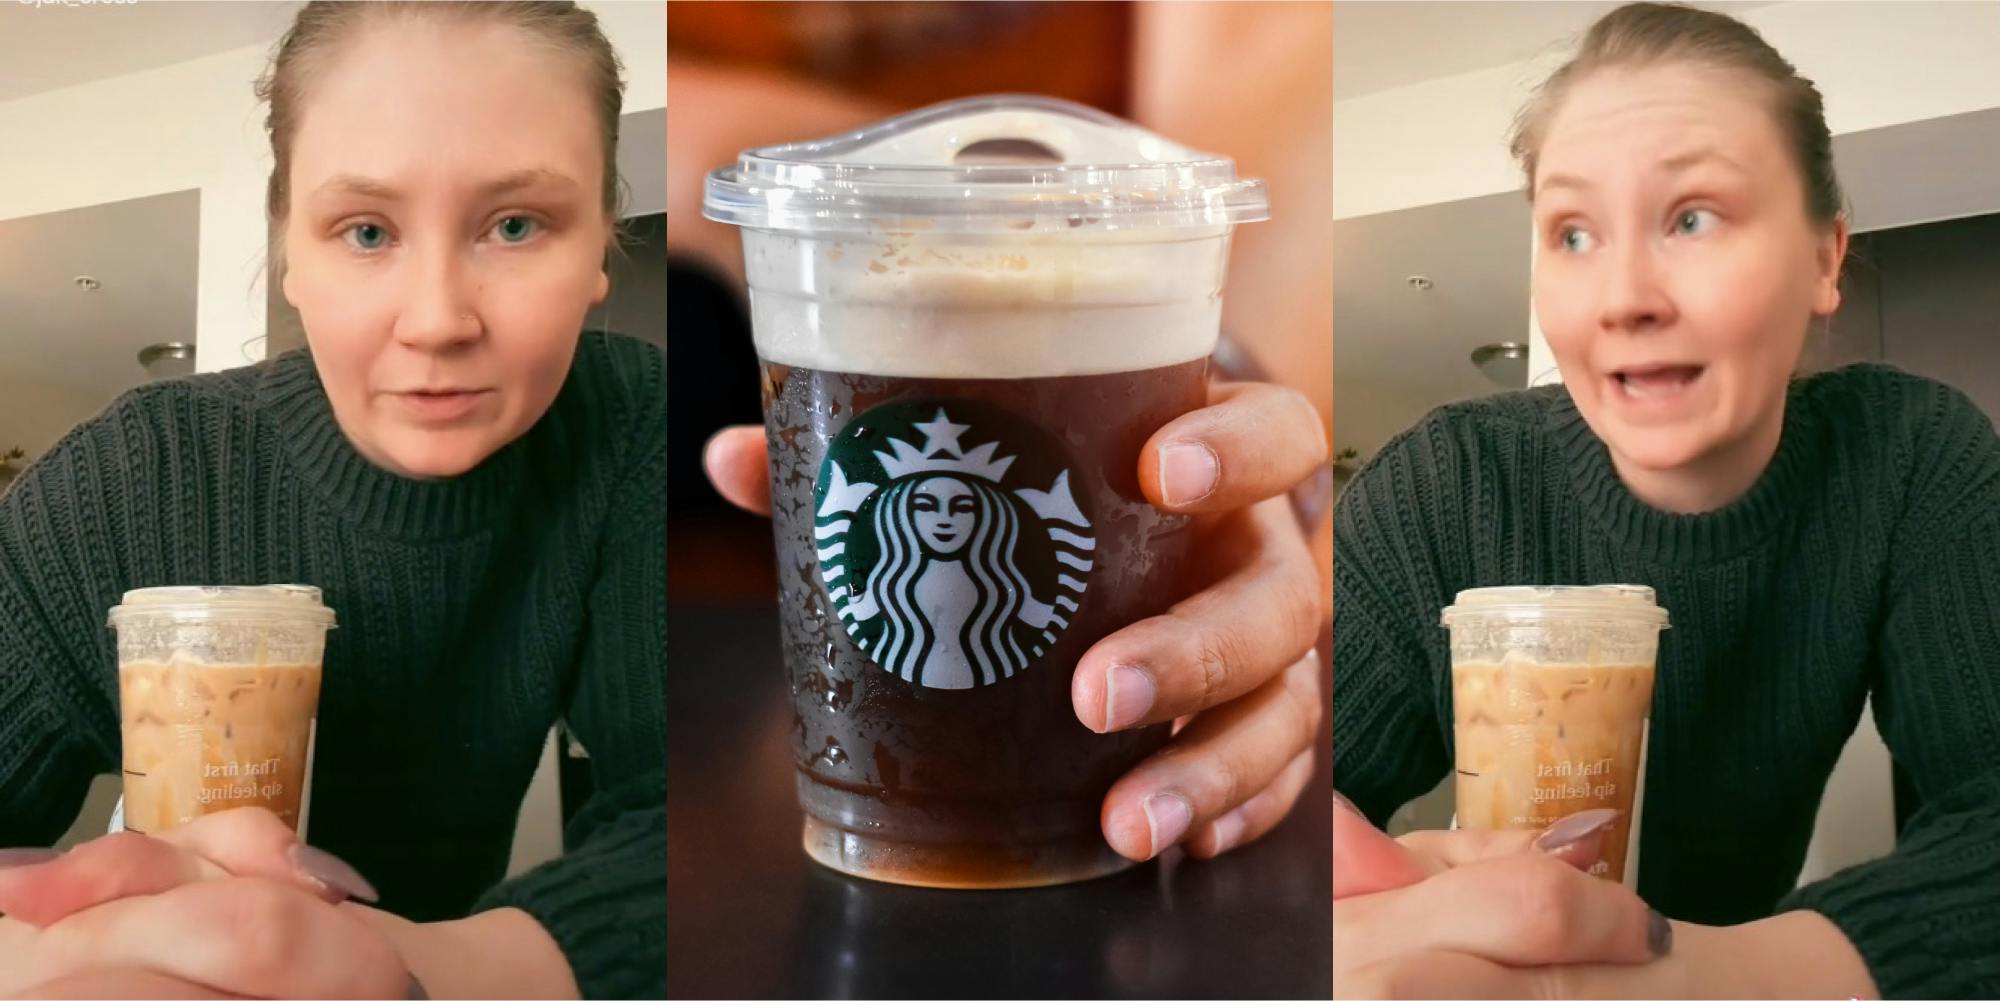 Starbucks Customer Asks if Ordering Cold Foam Is 'Problematic'